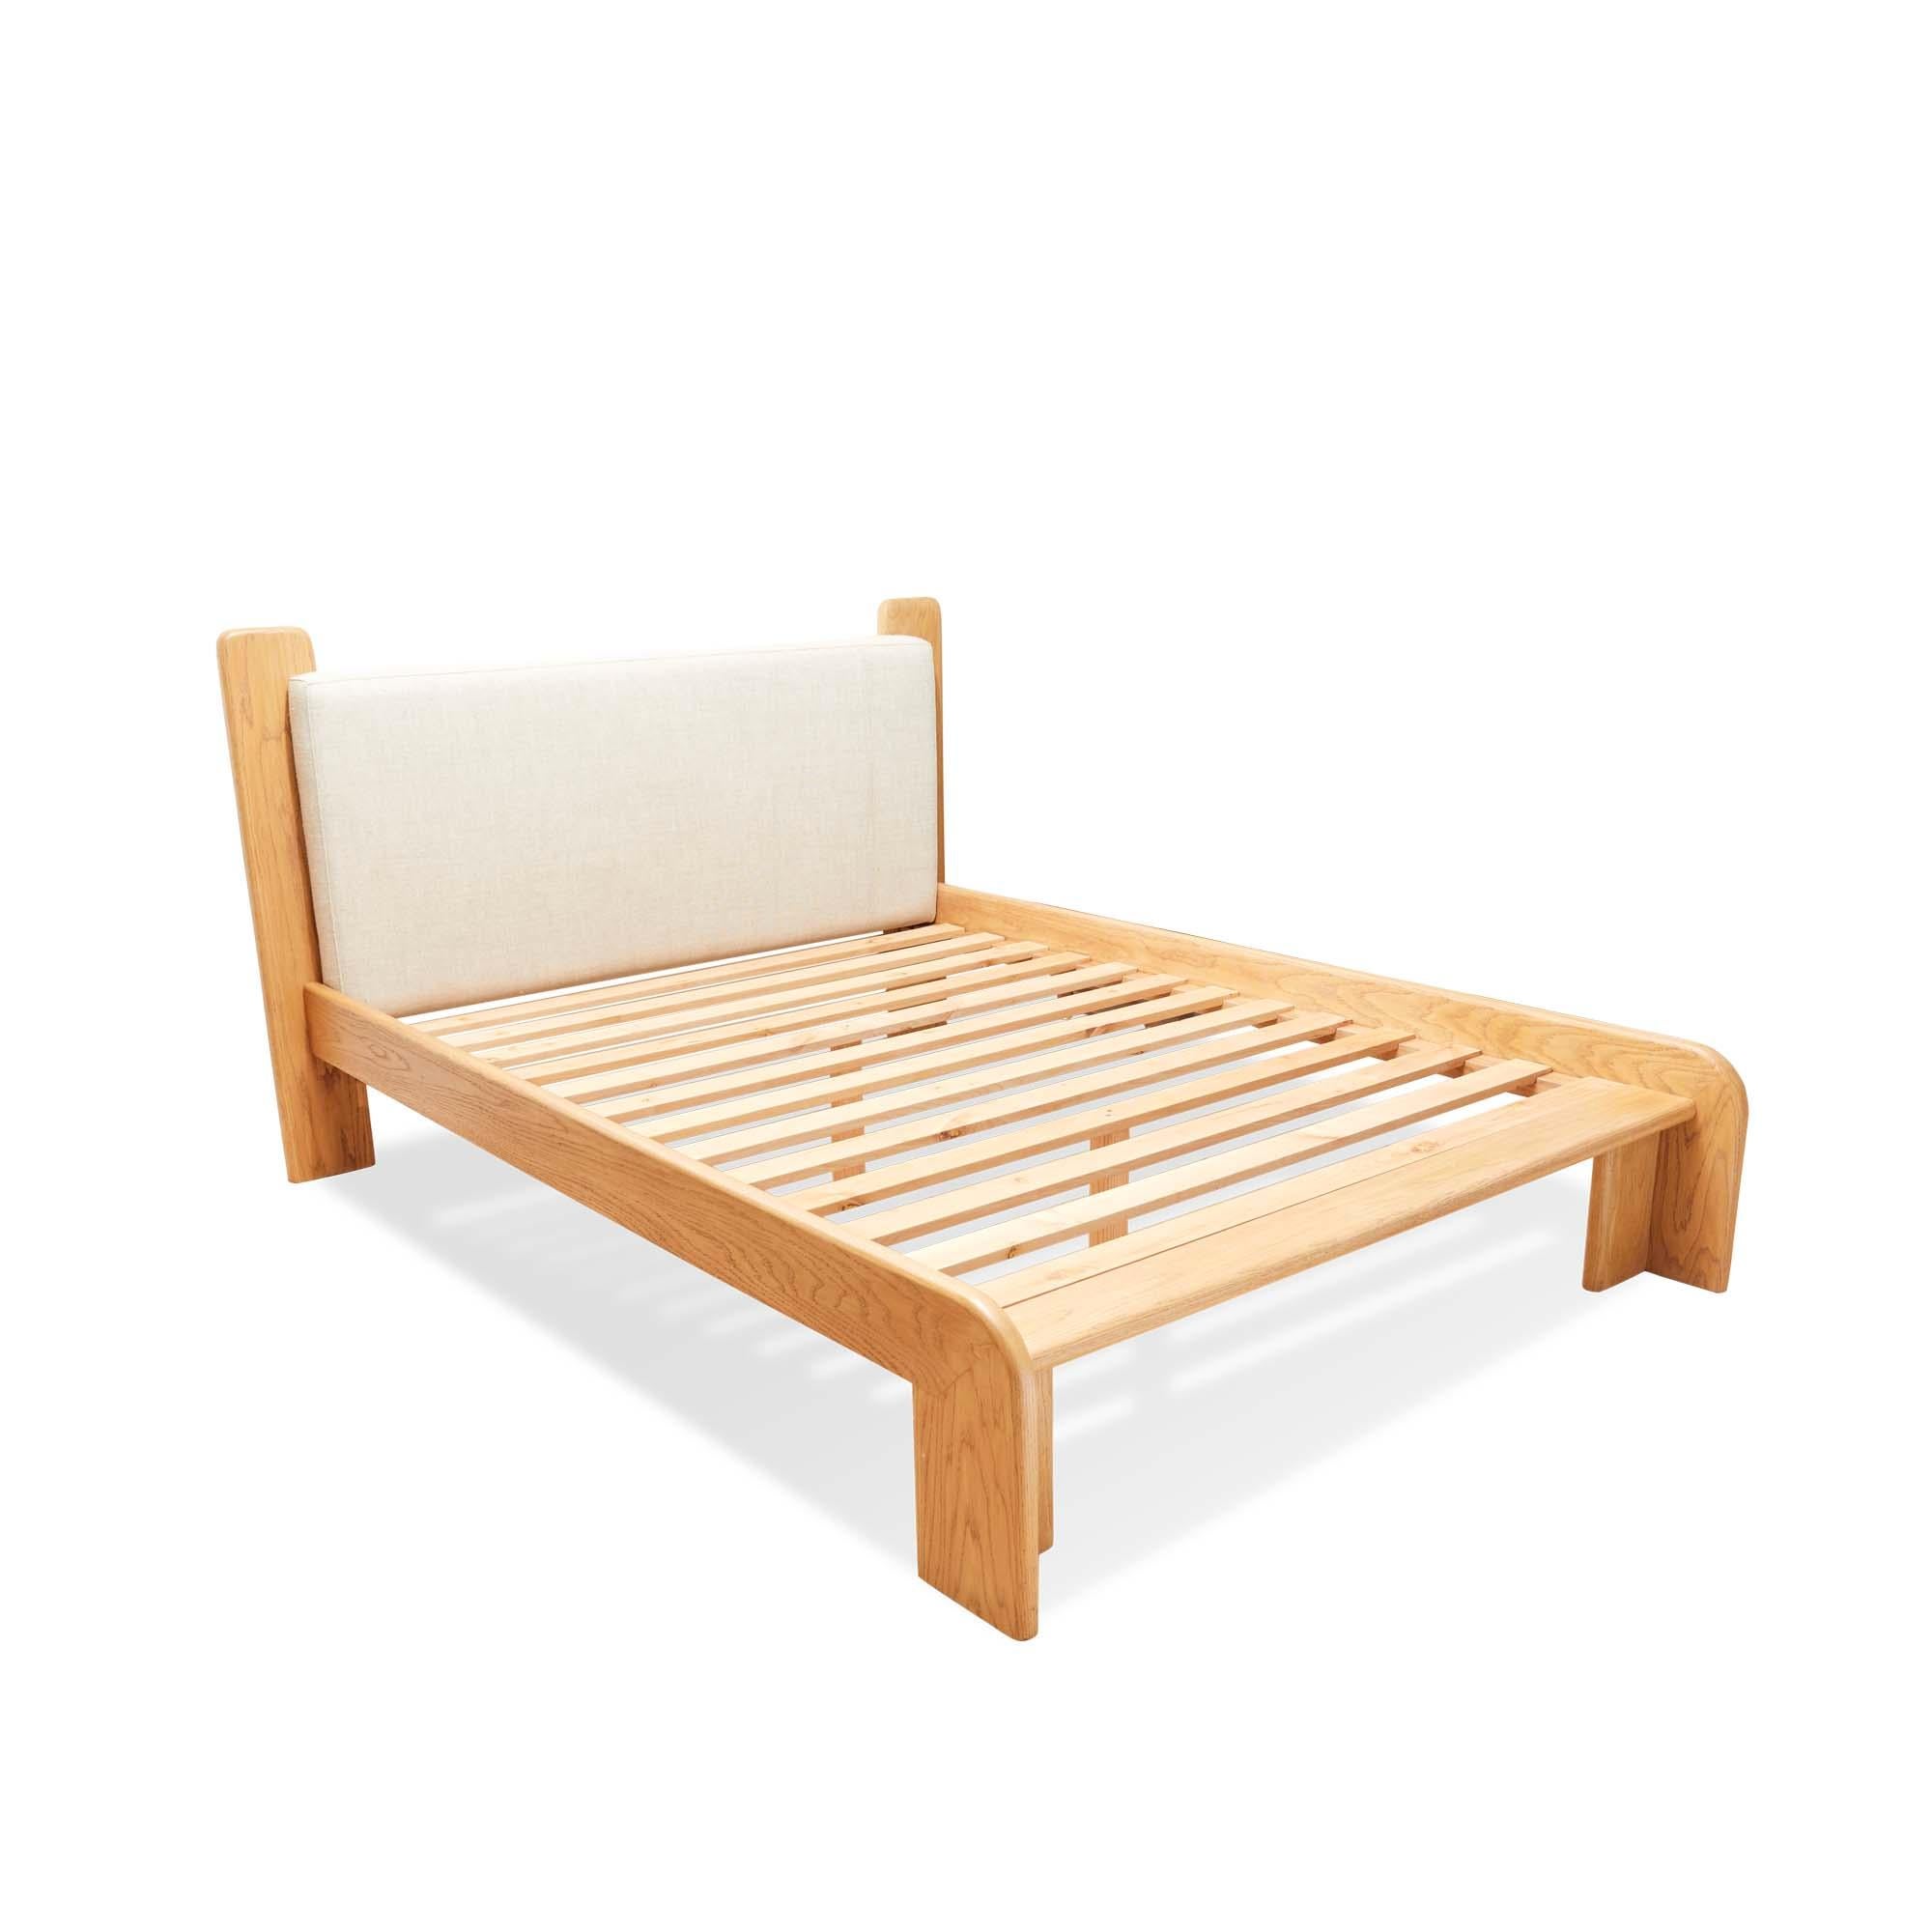 Oak topa bed by Lawson-Fenning Queen size. This original California roundover bed frame is handcrafted from white oak or American walnut and features a cozy upholstered headboard.

The Lawson-Fenning Collection is designed and handmade in Los